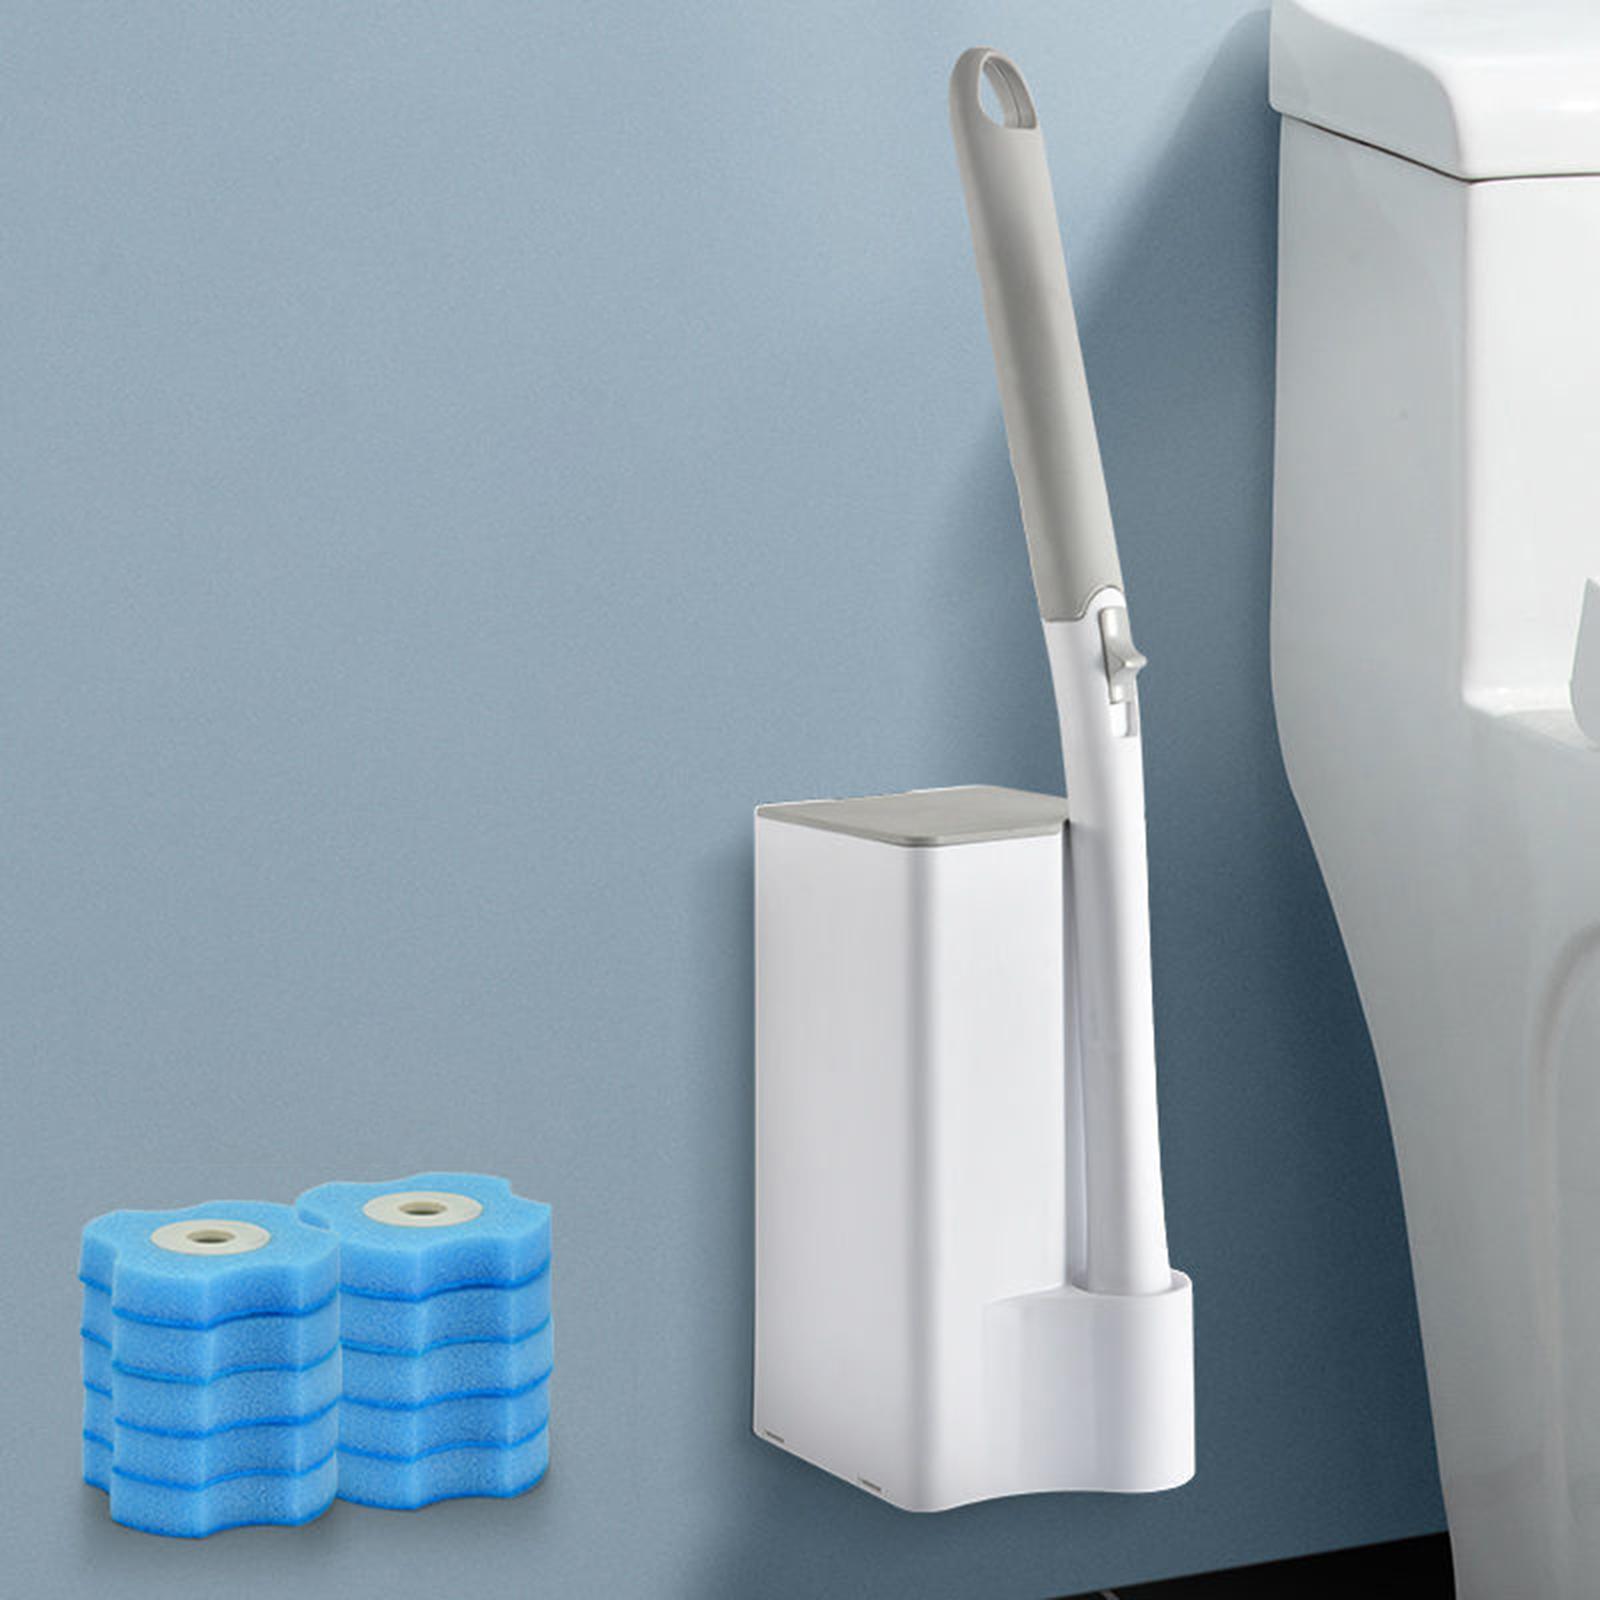 Disposable Toilet Brush Cleaning Kit Cleaning System for Hotel Household